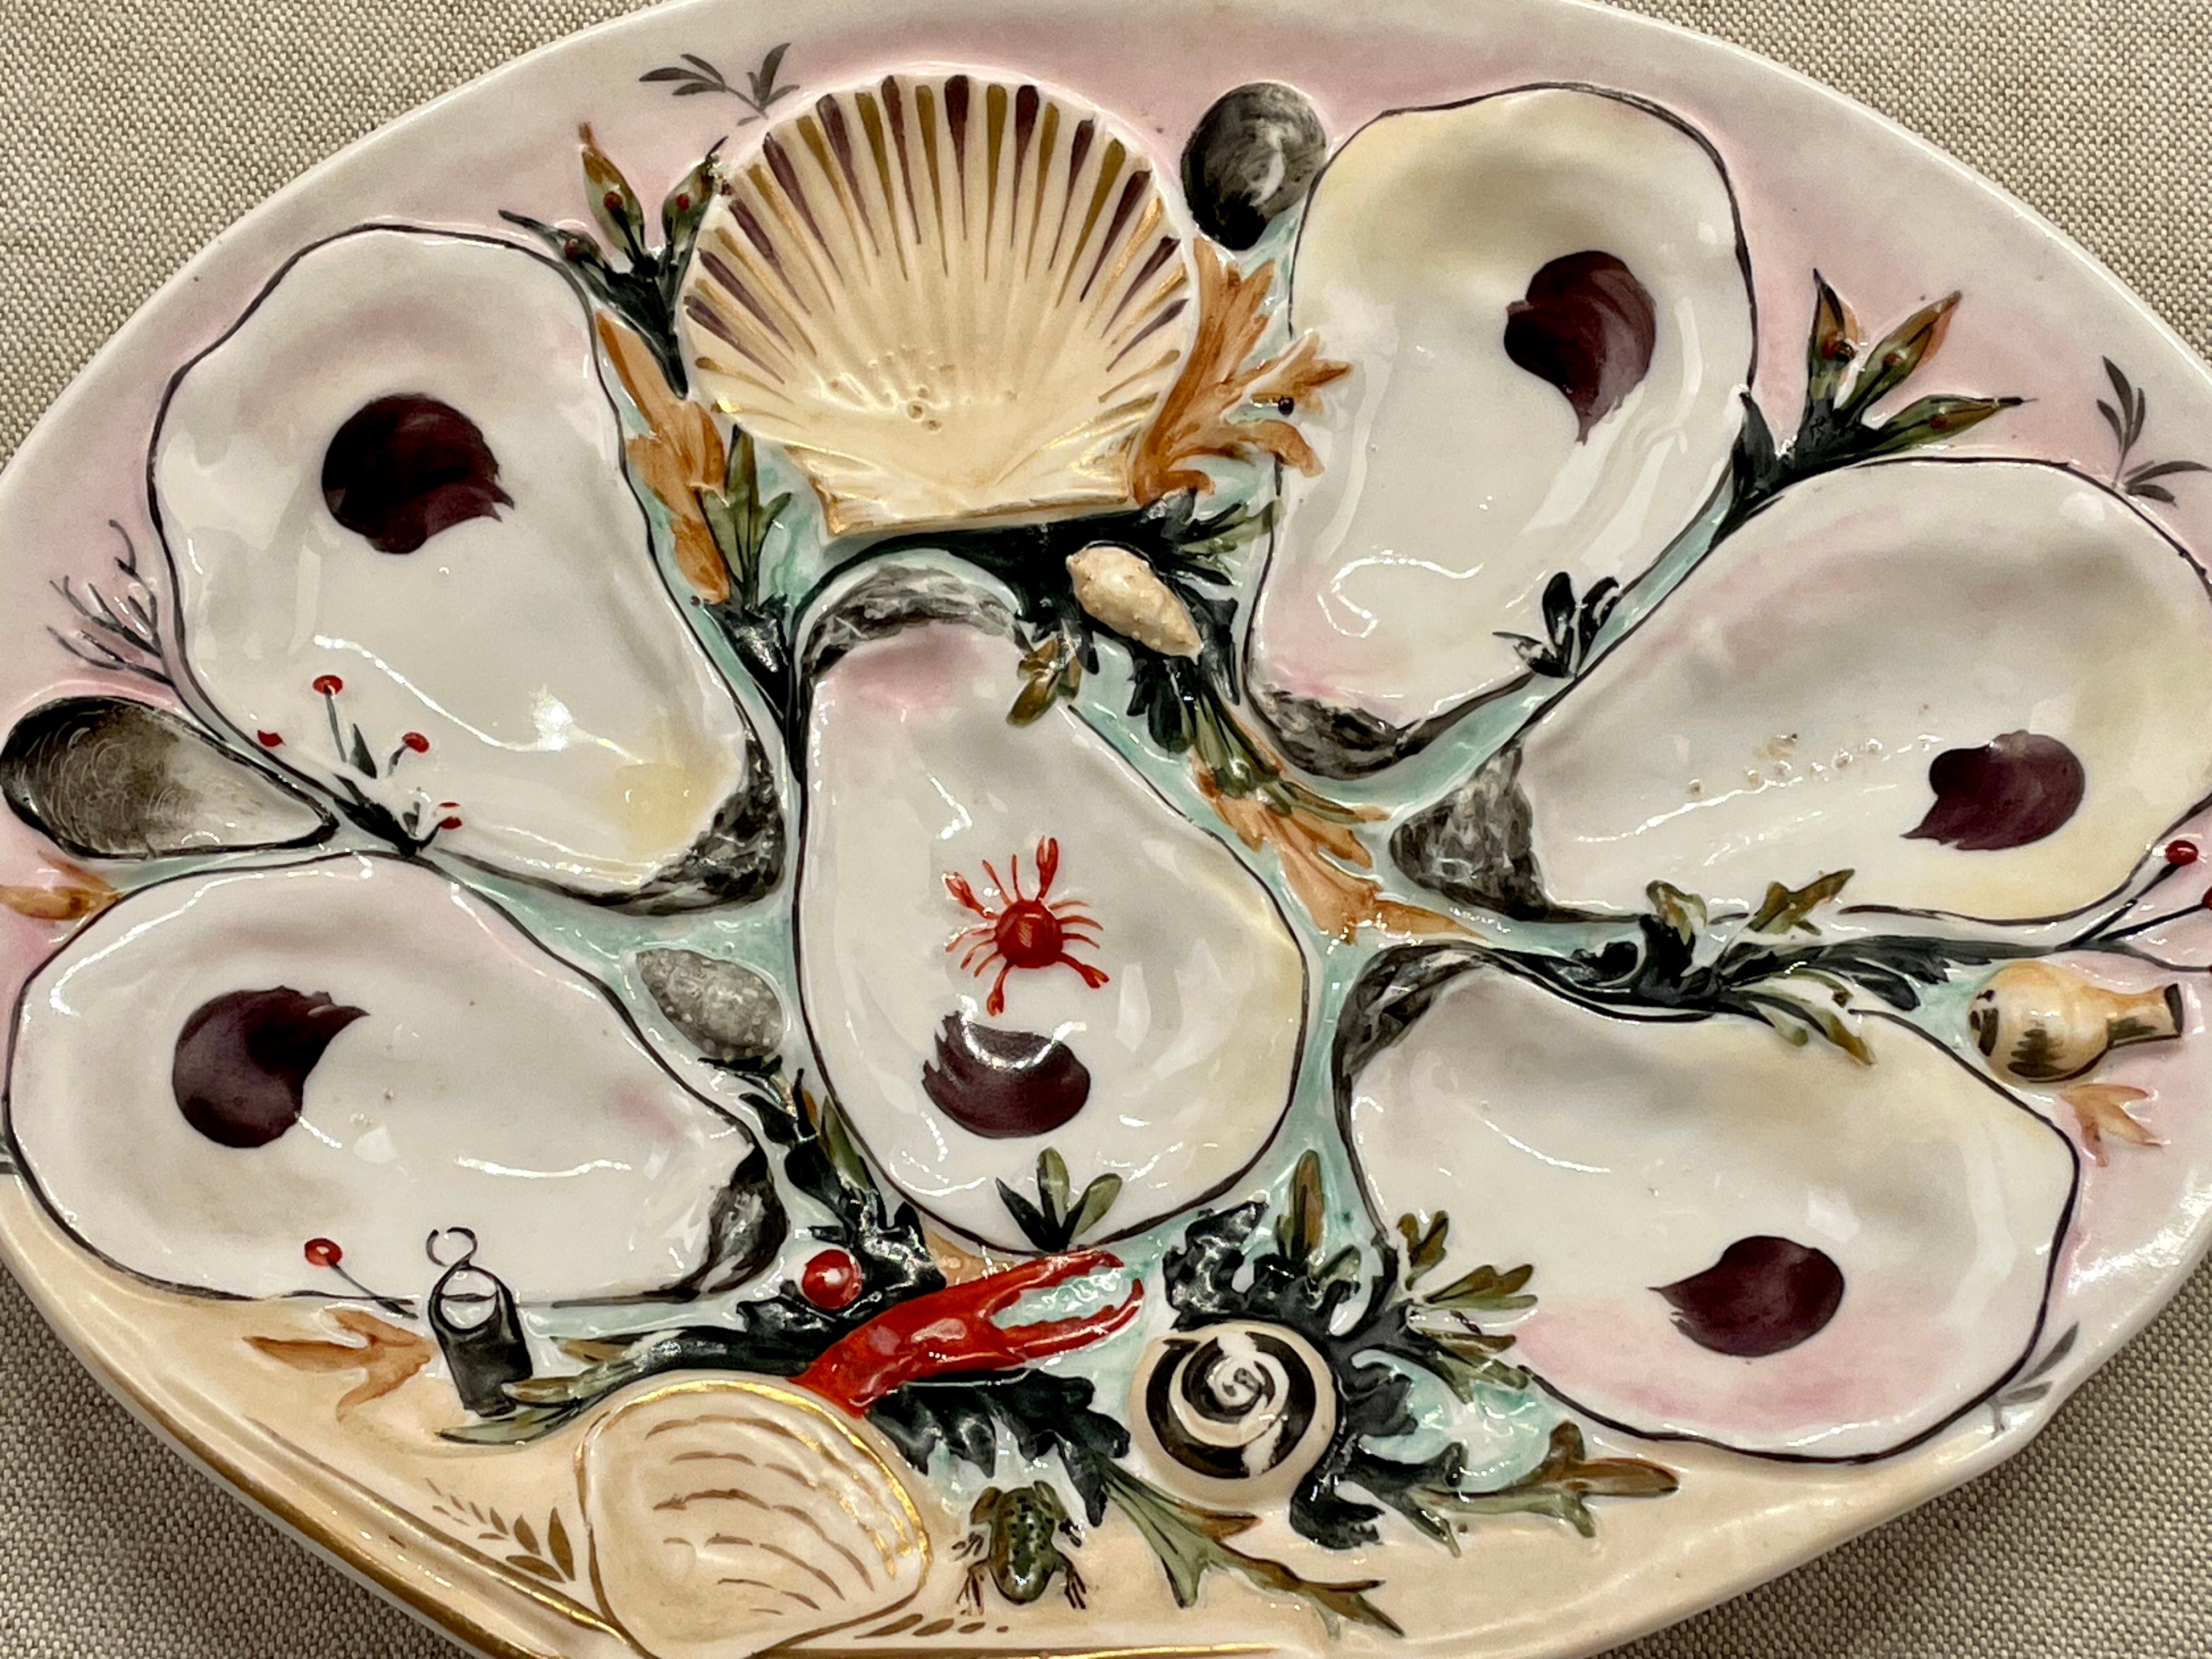 A 19th century oyster plate made by the Union Porcelain Works of Greenpoint, New York. Hand-painted with pale yellow ground and gilt accents. Nicely shaped and molded with six shallow wells for oysters and a scallop shell for sauce, surrounded by